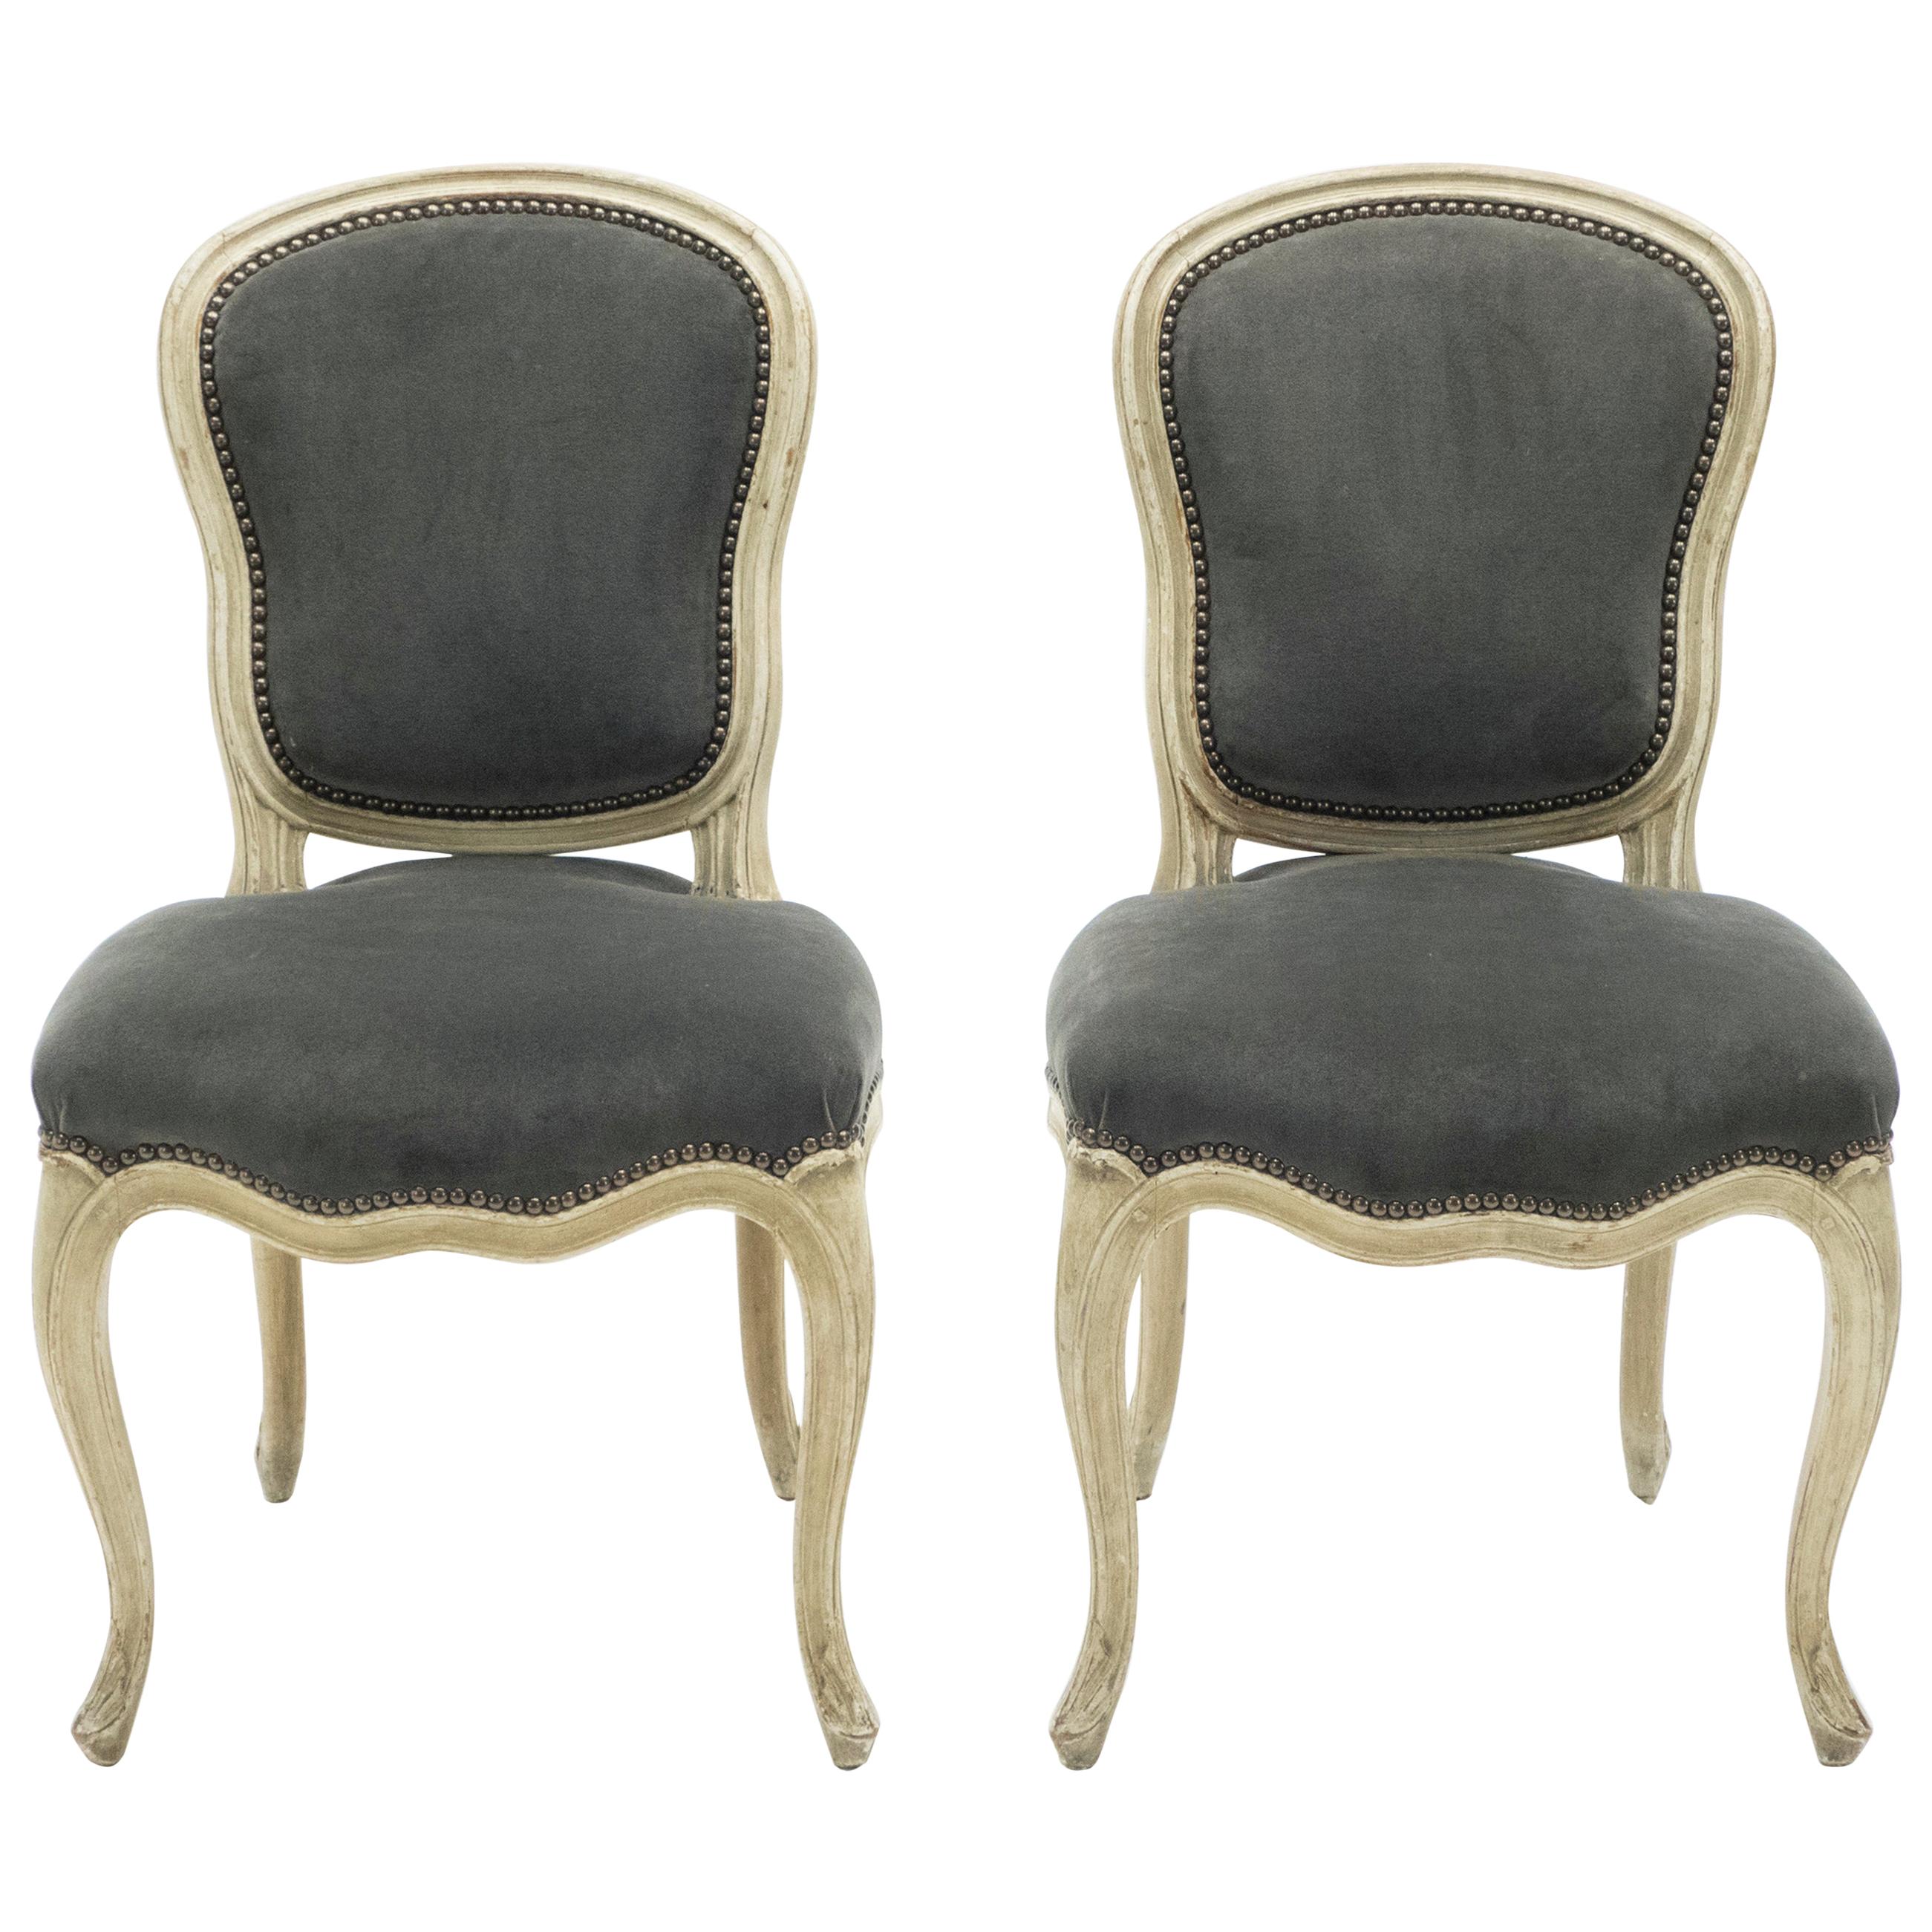 Rare Pair of Stamped Maison Jansen Louis XV Neoclassical Chairs, 1940s For Sale